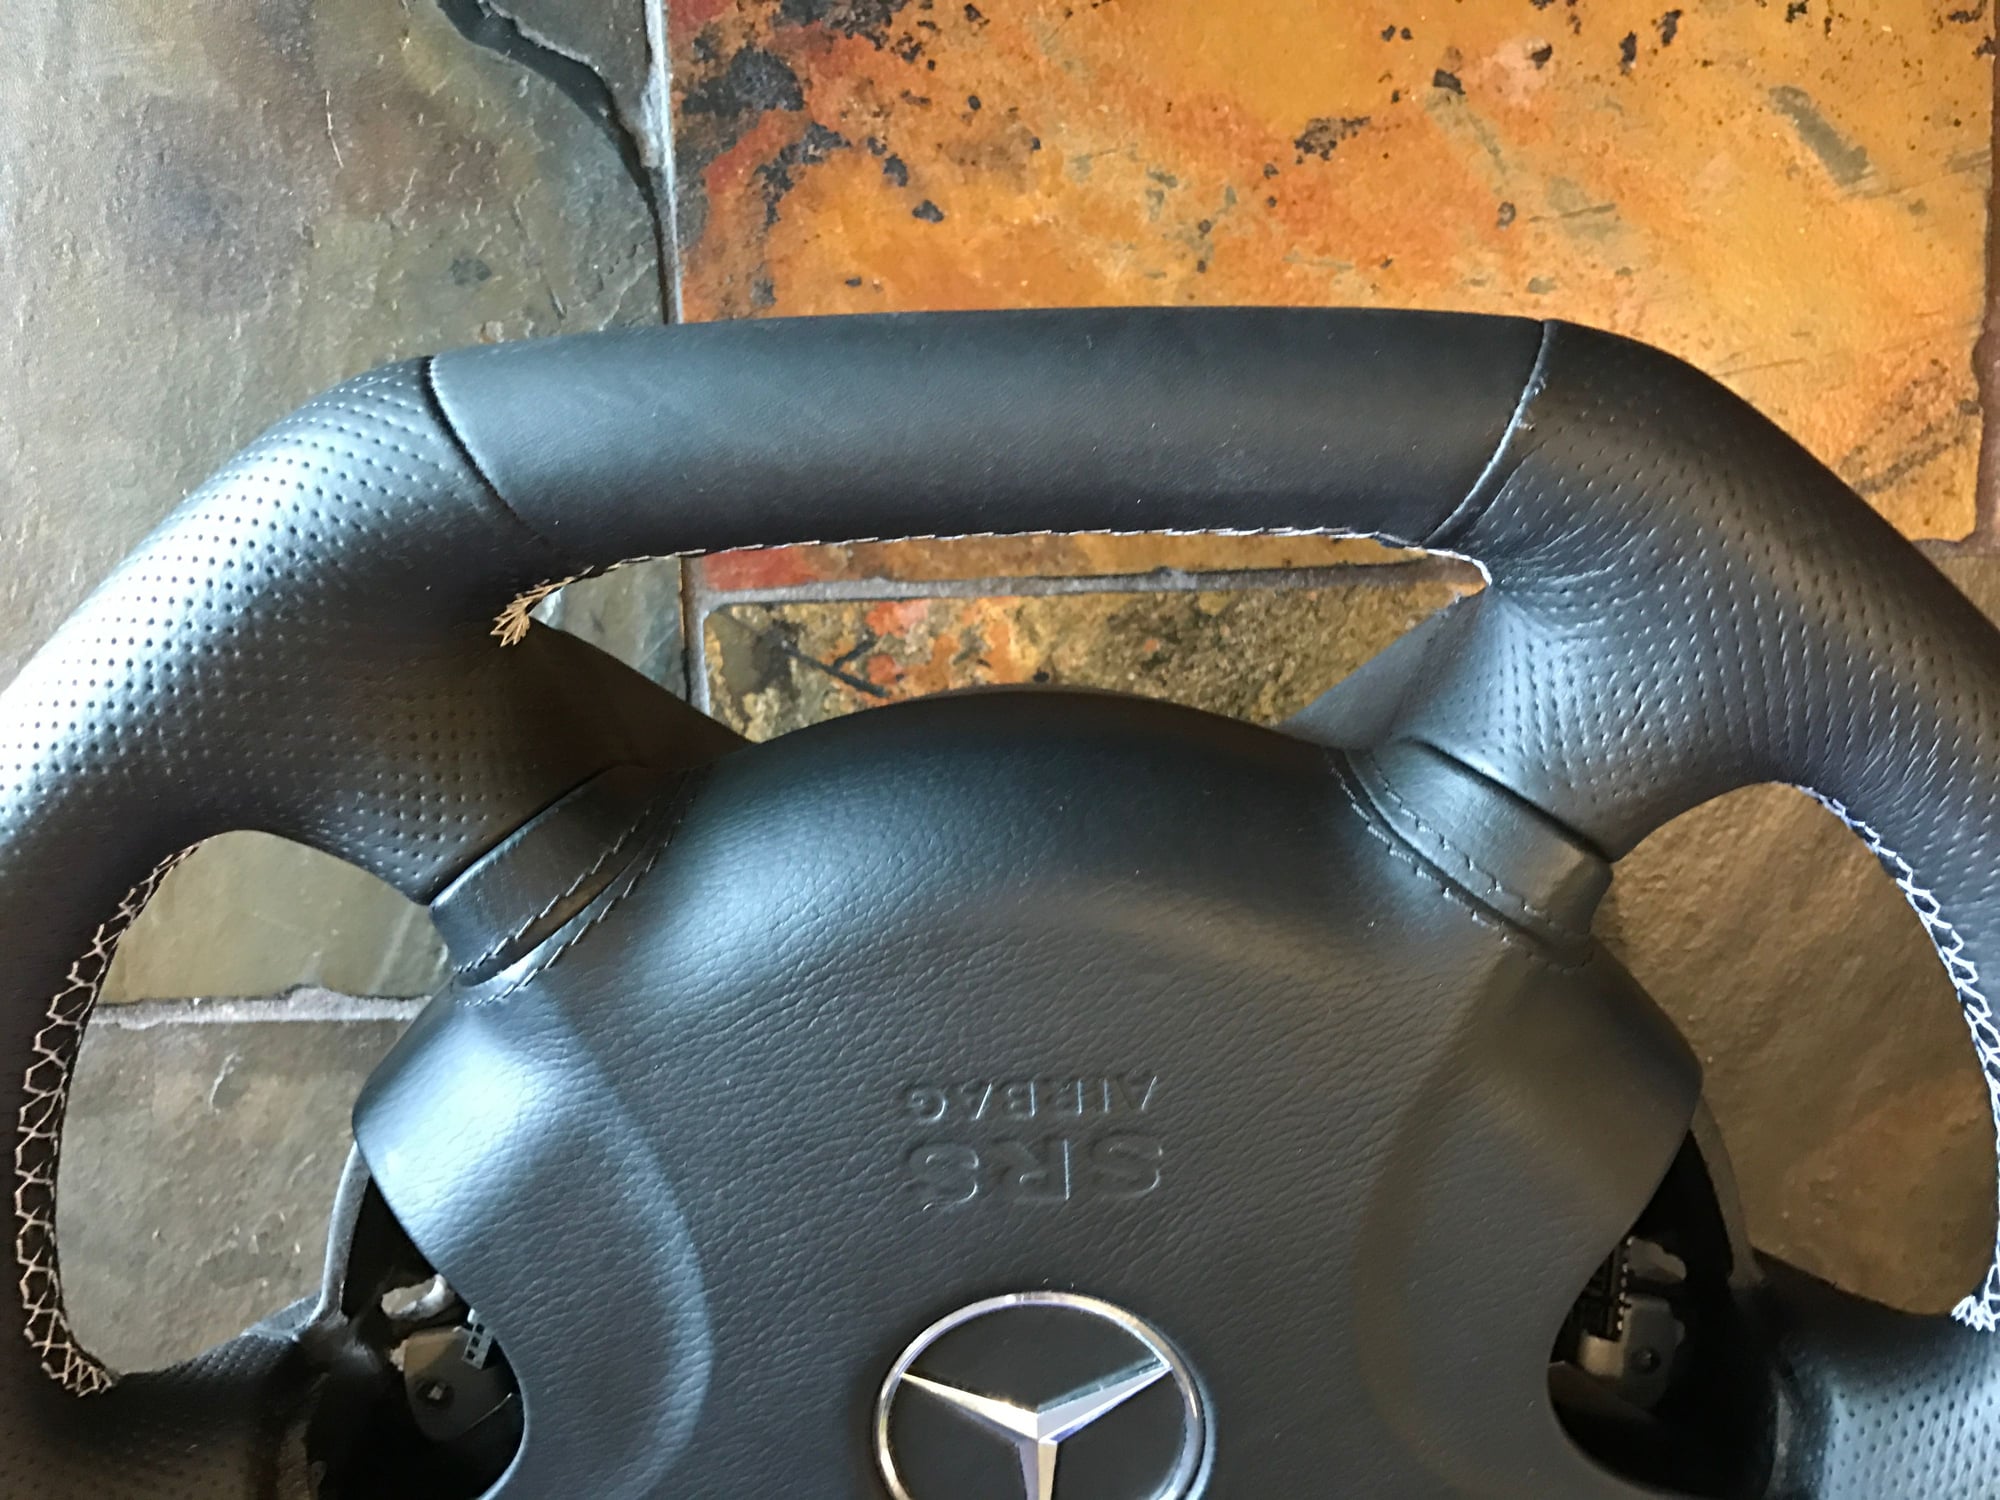 Interior/Upholstery - W211 Flat Bottom Steering Wheel with Leather Air Bag - New - 2005 to 2006 Mercedes-Benz E55 AMG - Sterling, VA 20165, United States